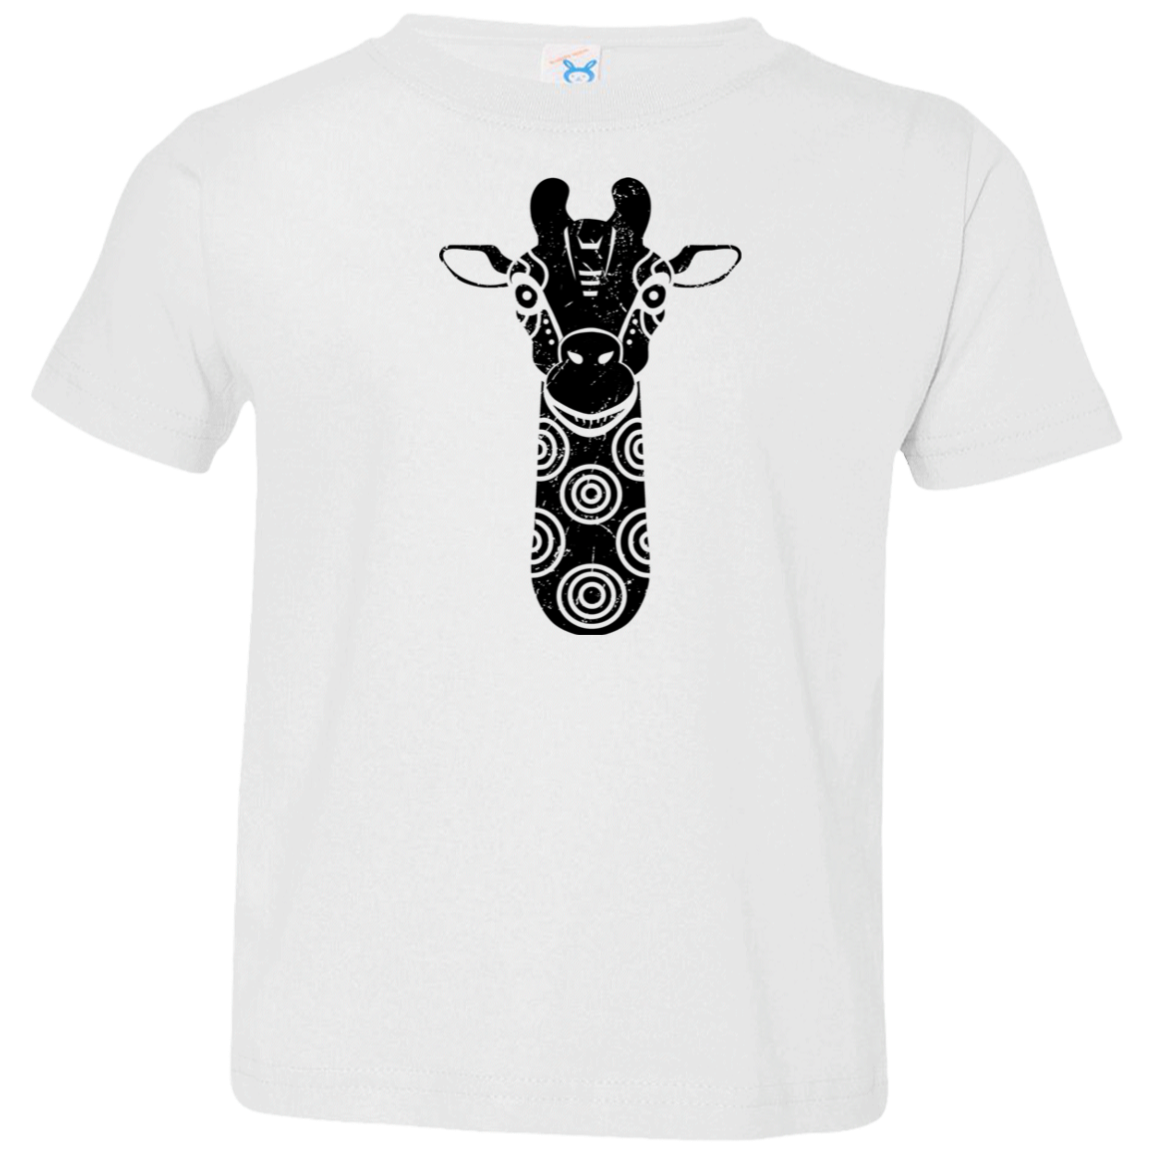 Black Distressed Emblem T-Shirt for Toddlers (Giraffe/Archie)